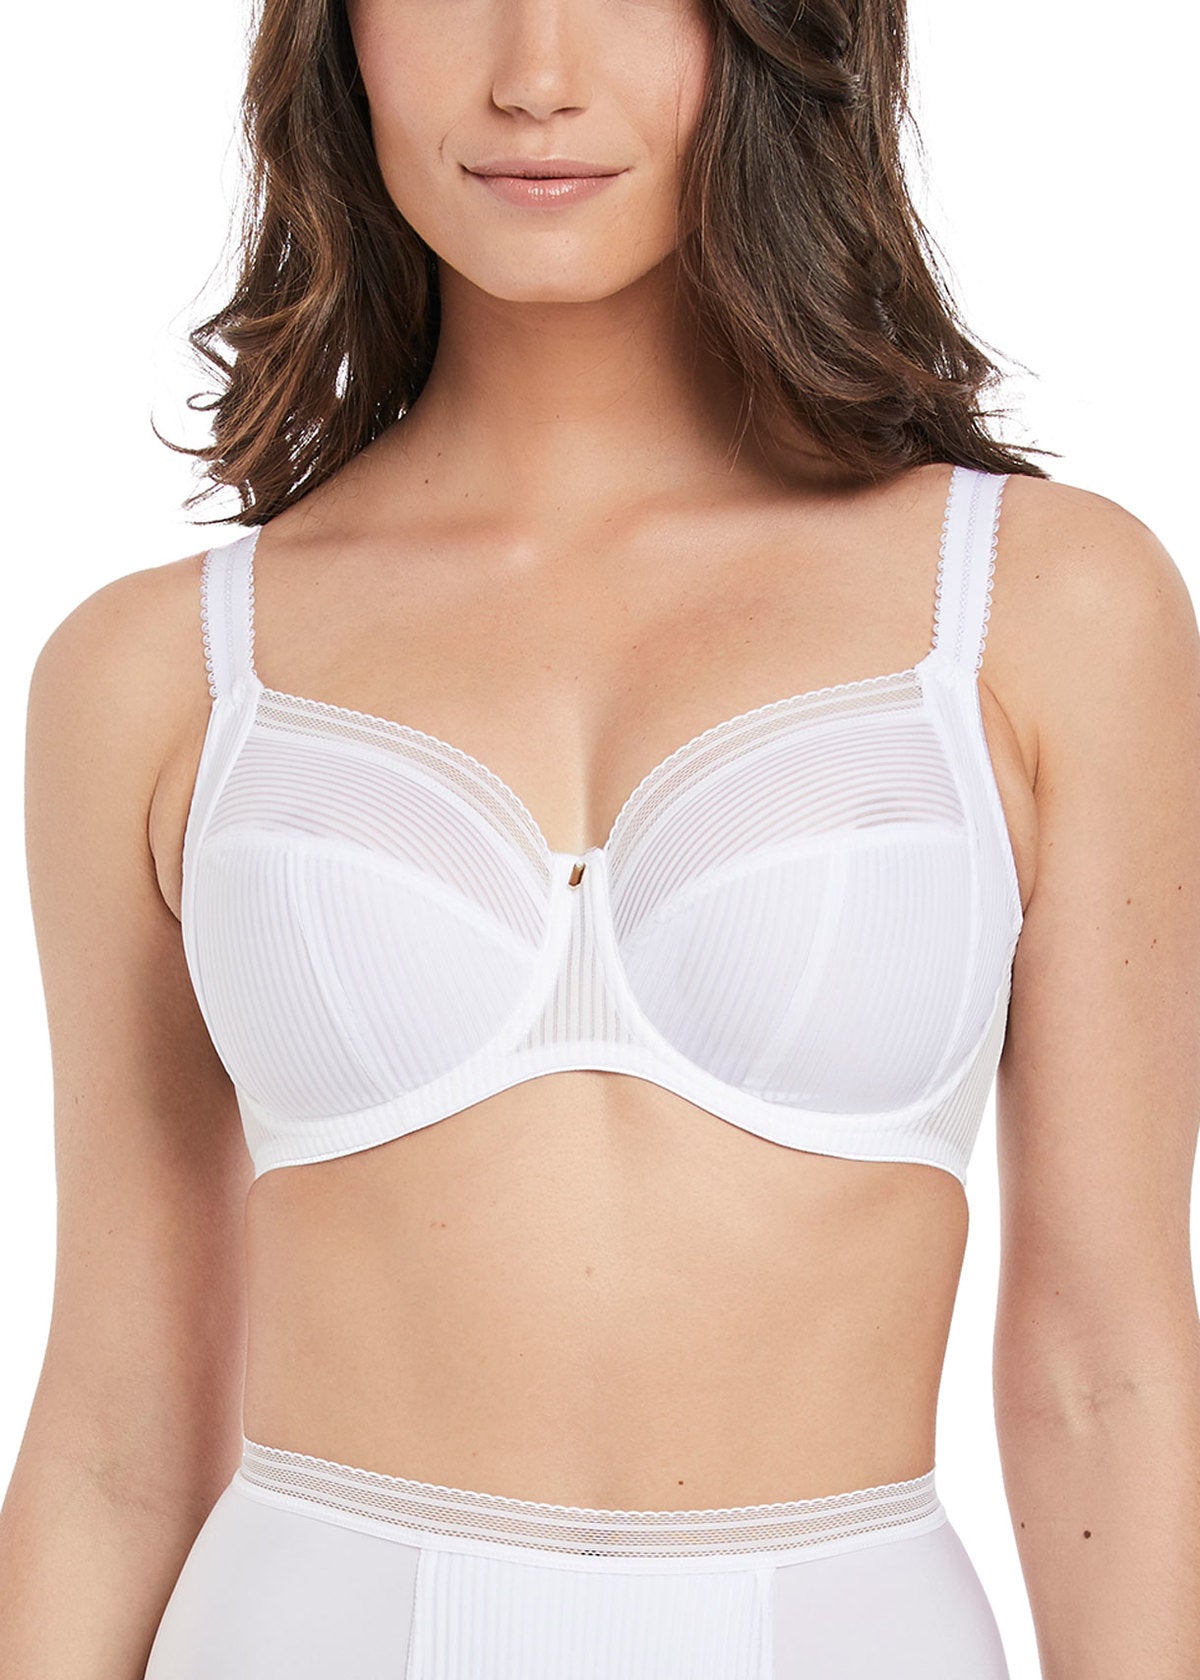 Fantasie Fusion Full Cup Side Support Bra - White 2 Shaws Department Stores